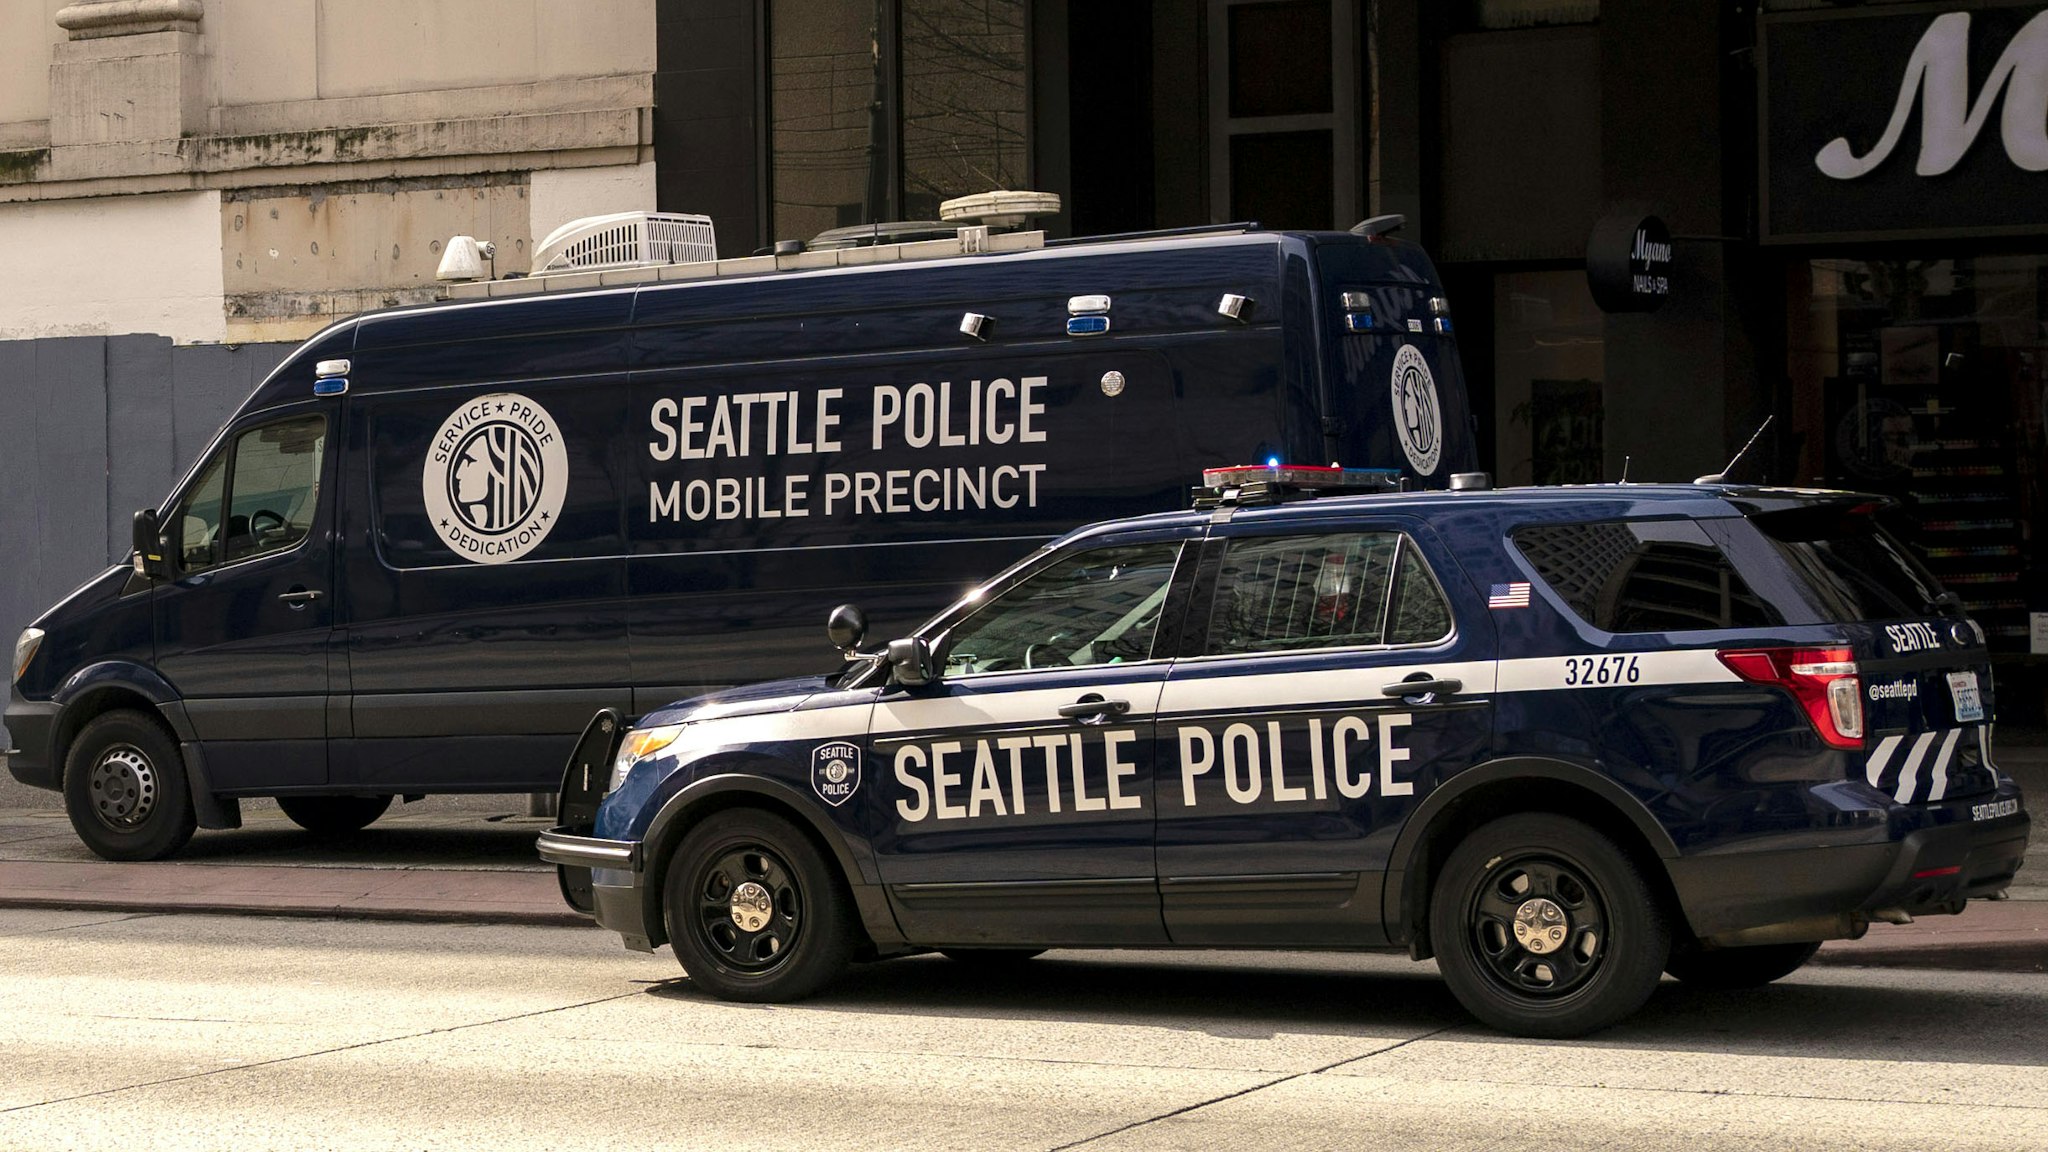 Seattle Police Department vehicles surround a mobile precinct unit on Third Avenue in downtown Seattle, Washington, U.S., on Thursday, March 24, 2022. Amazon is temporarily shuttering an office in the area as police increase their presence downtown. Seattle's new mayor, Bruce Harrell, swept into office on a law-and-order platform that also pledged to stem rising homelessness, crime has instead worsened downtown and the area's post-Covid rebound is lagging behind other parts of the city.